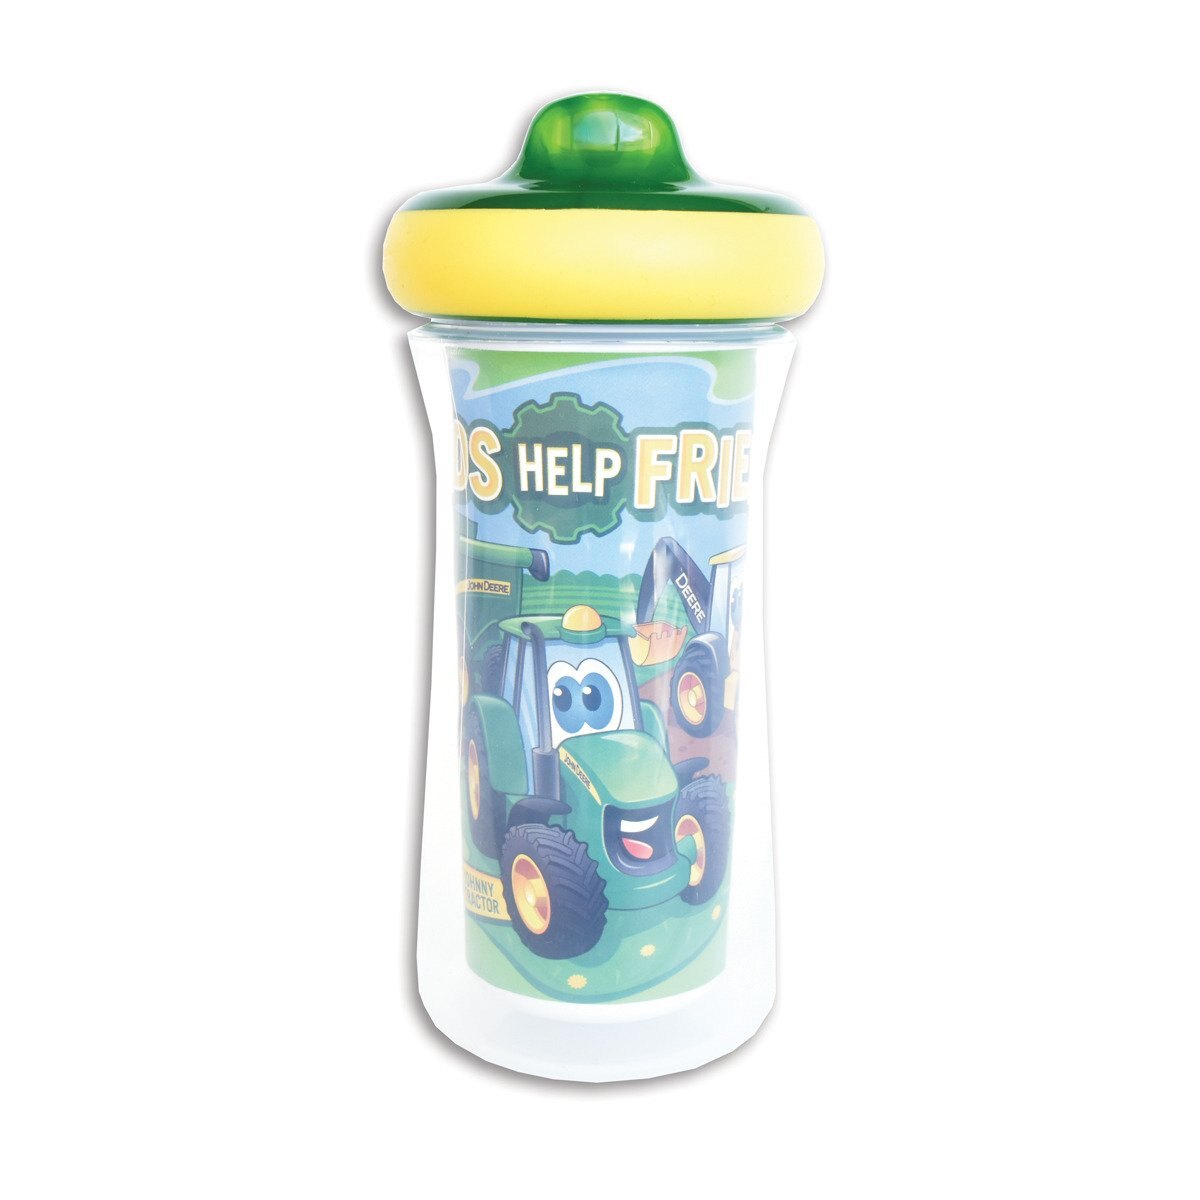 John Deere Insulated 9oz Sippy Cup